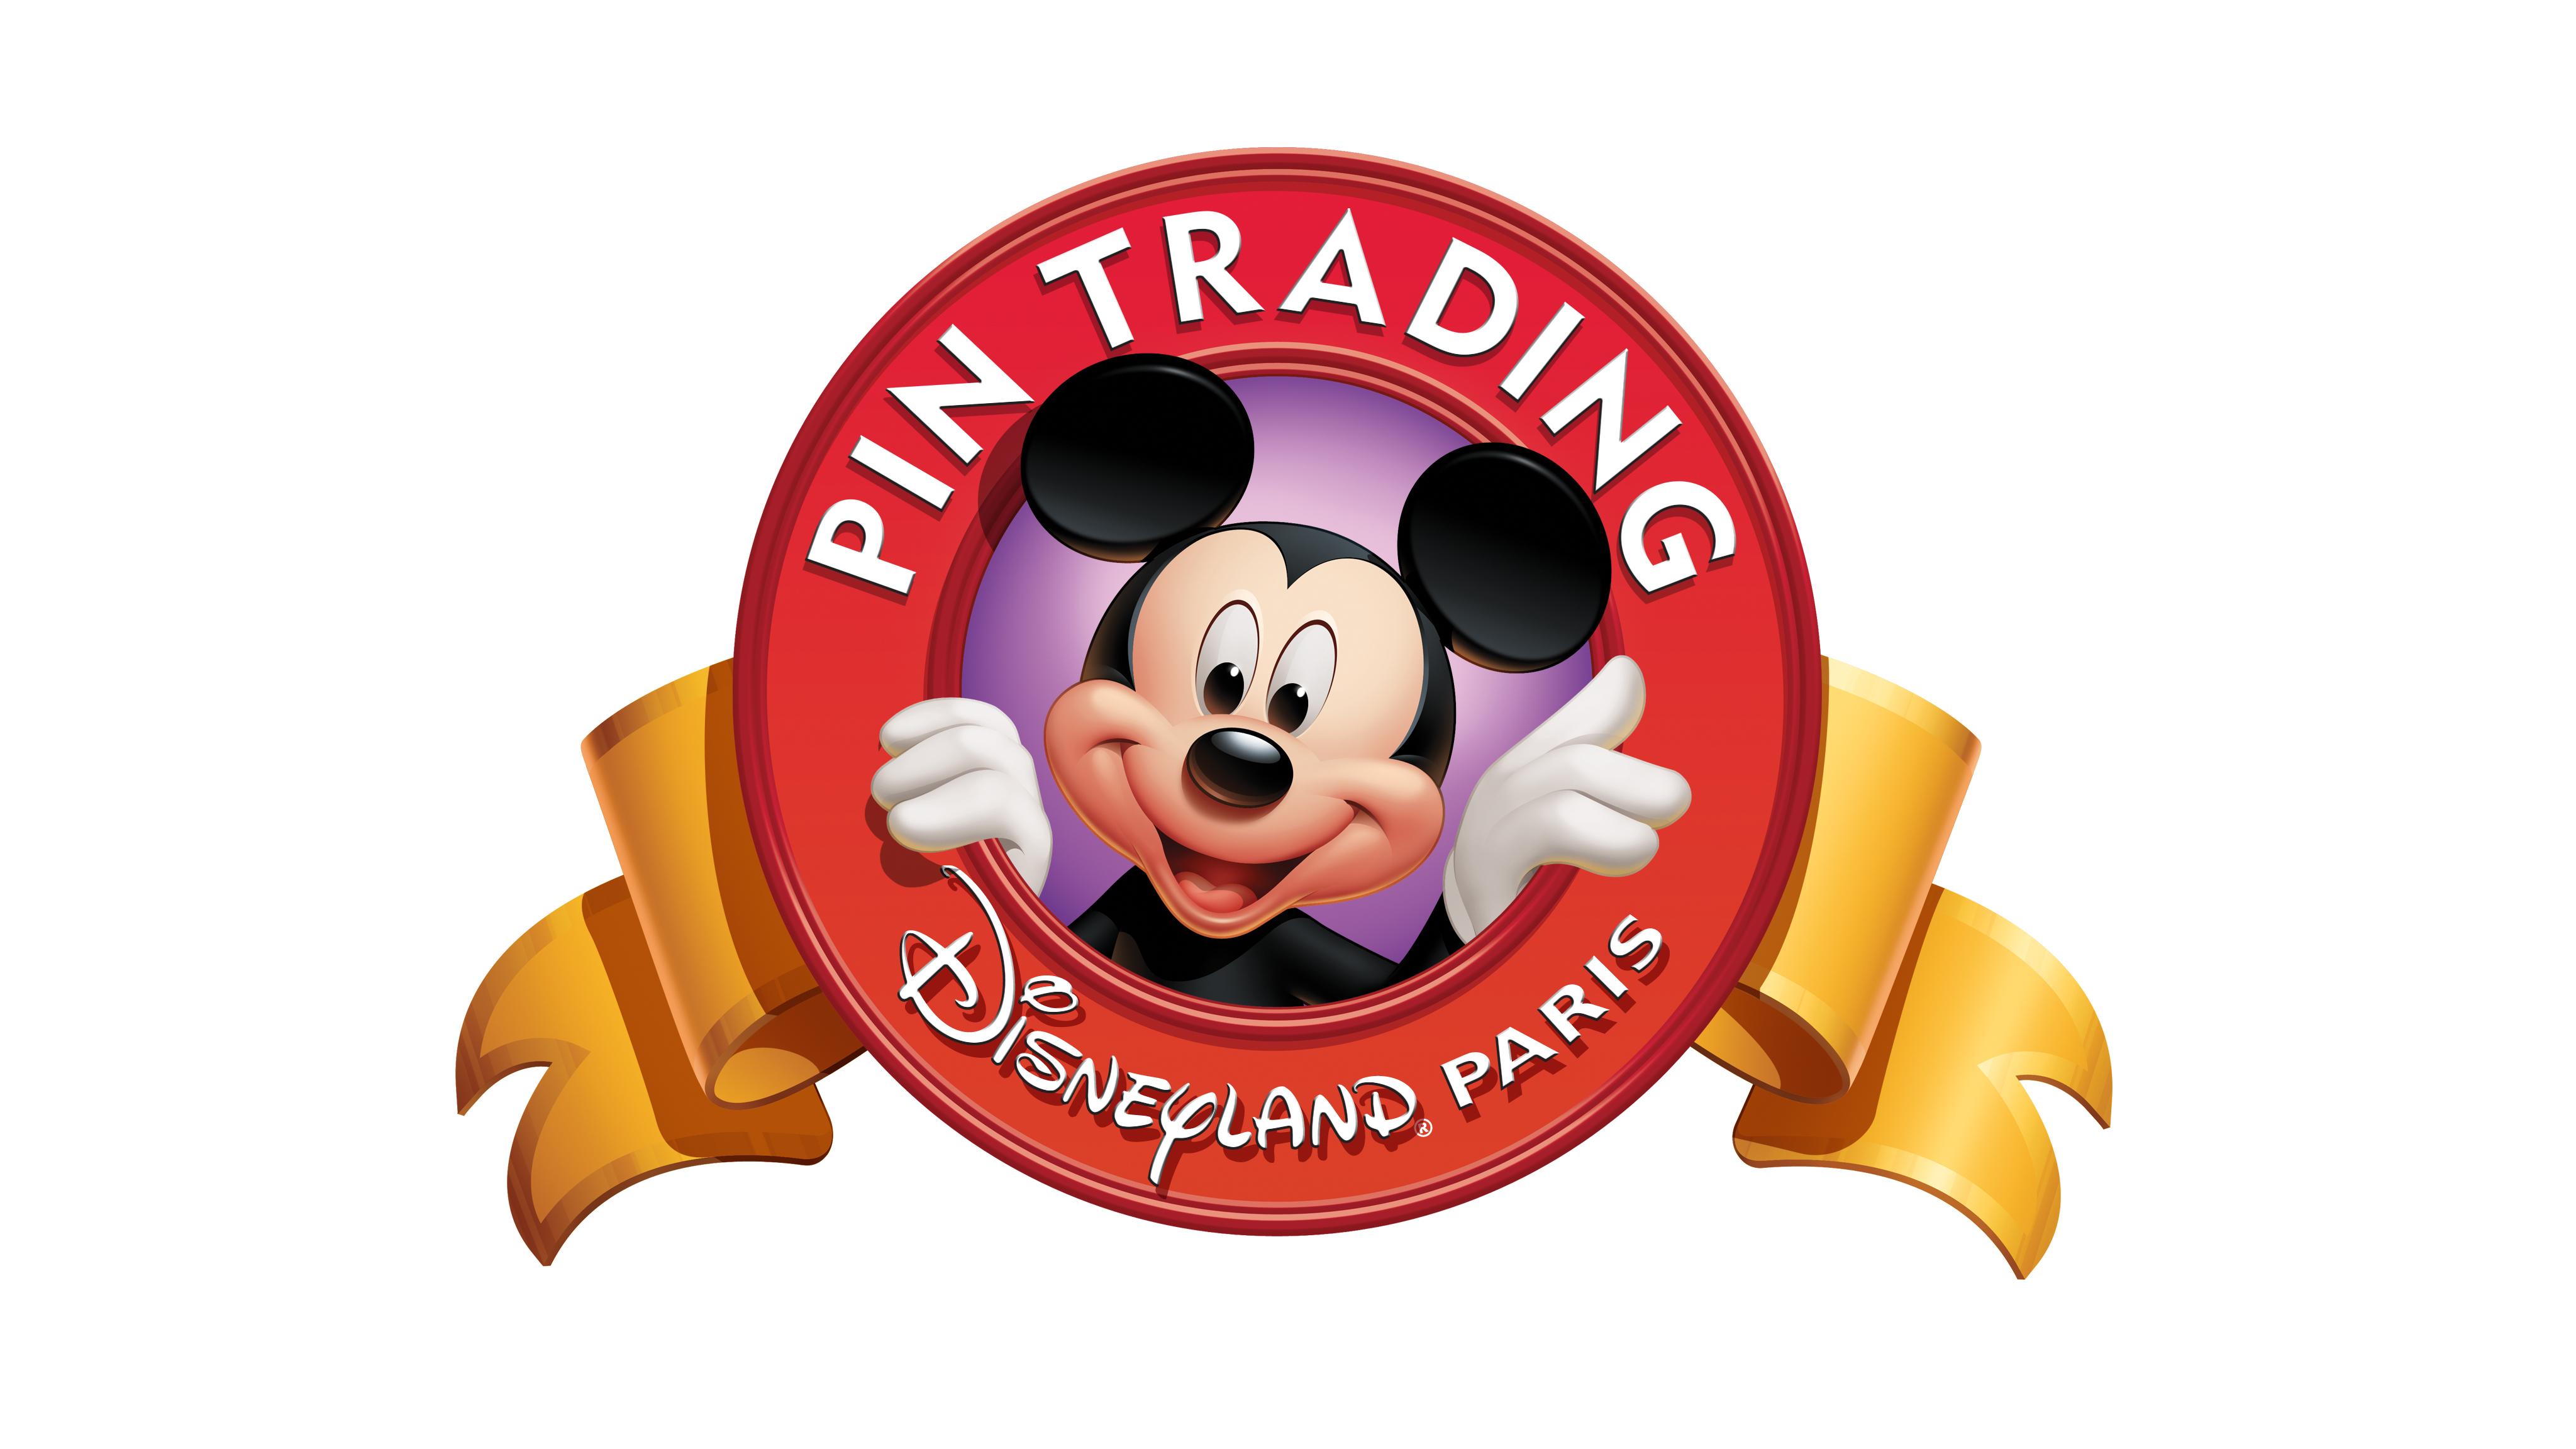 Disney Pin Trading 101 - 10 Things You Should Know Before You